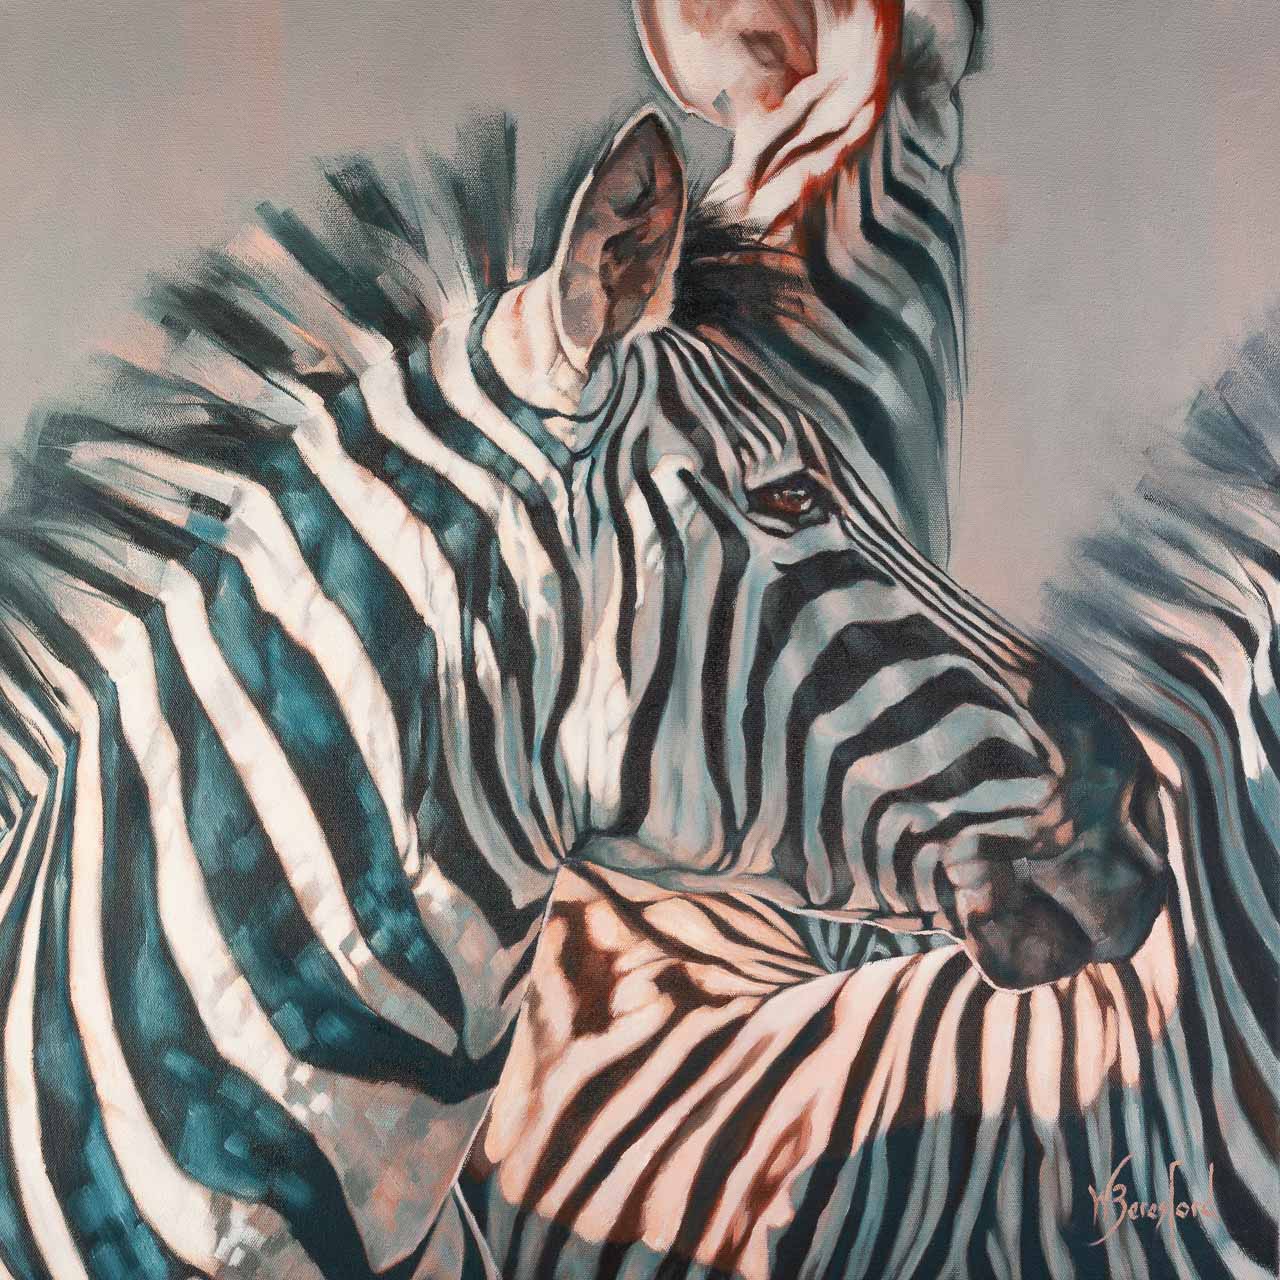 "Storm Watchers", oil painting on stretched canvas, portrait of zebras, by Wendy Beresford